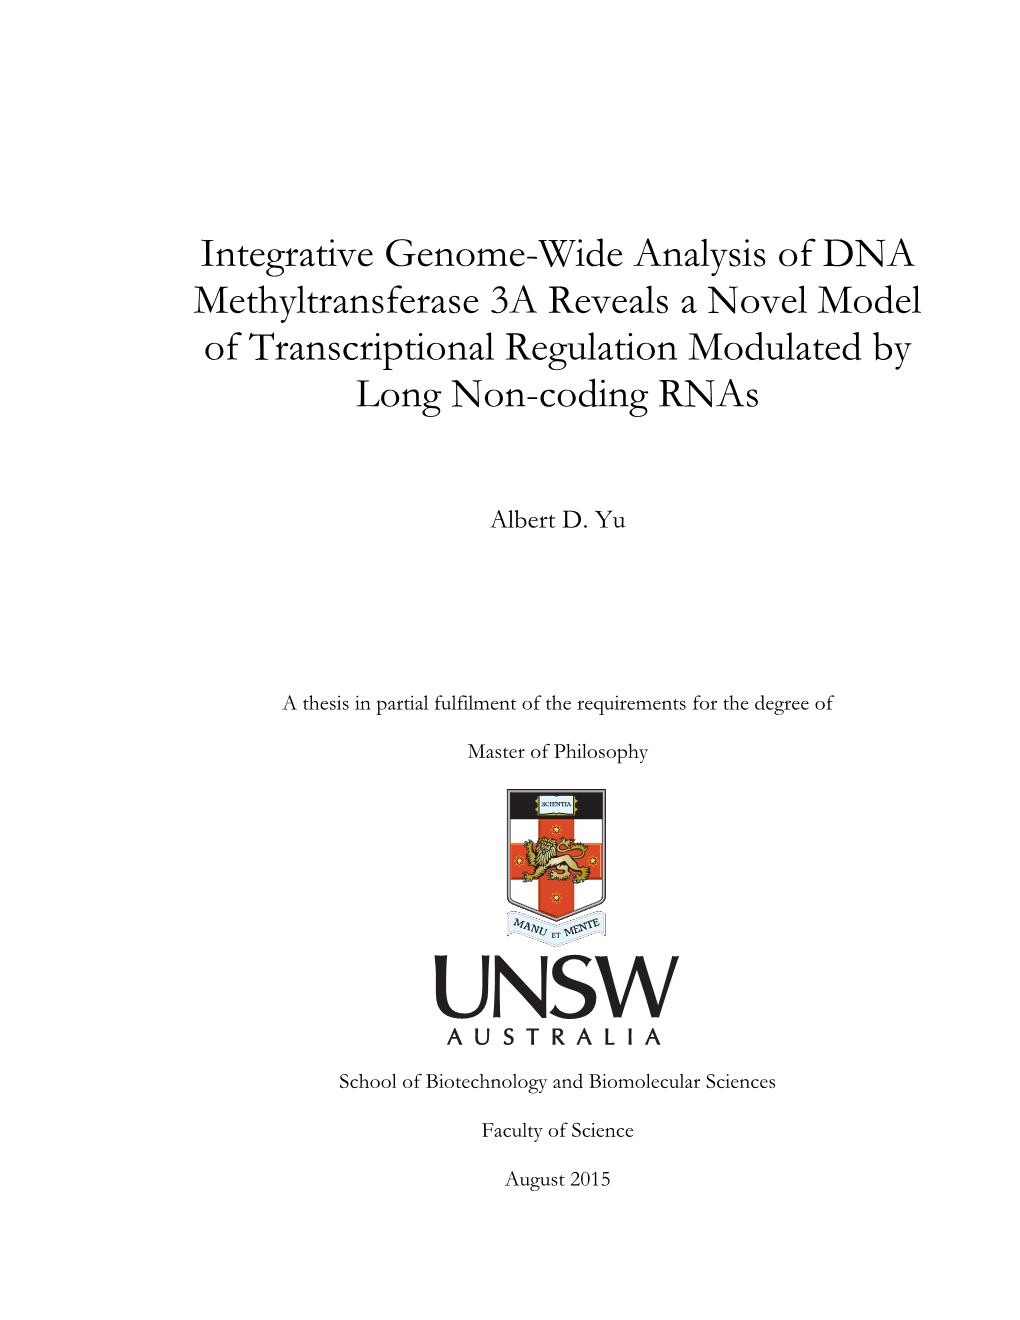 Integrative Genome-Wide Analysis of DNA Methyltransferase 3A Reveals a Novel Model of Transcriptional Regulation Modulated by Long Non-Coding Rnas